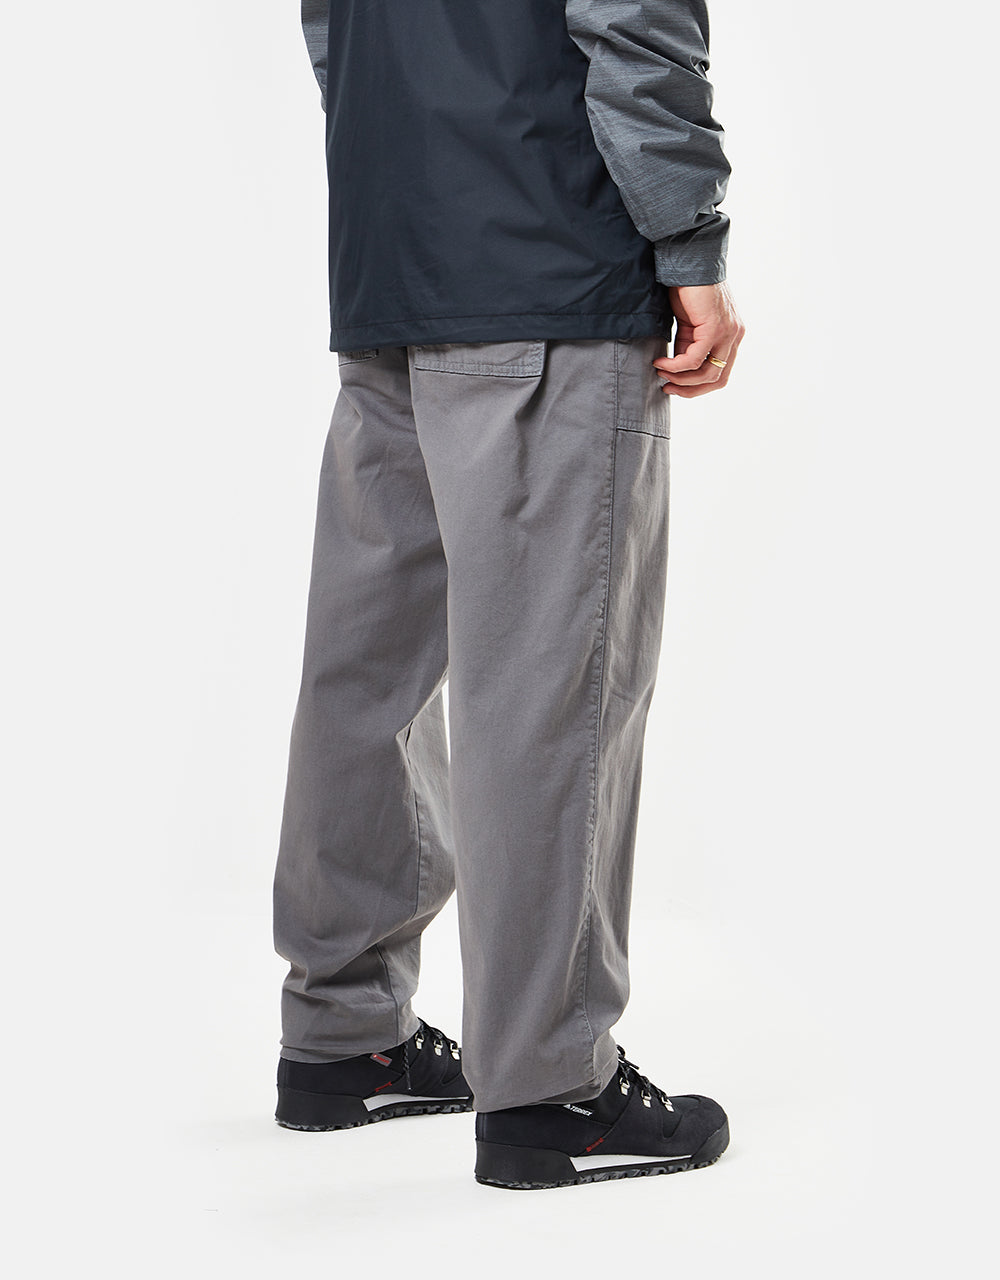 Route One Climbing Pant - Charcoal